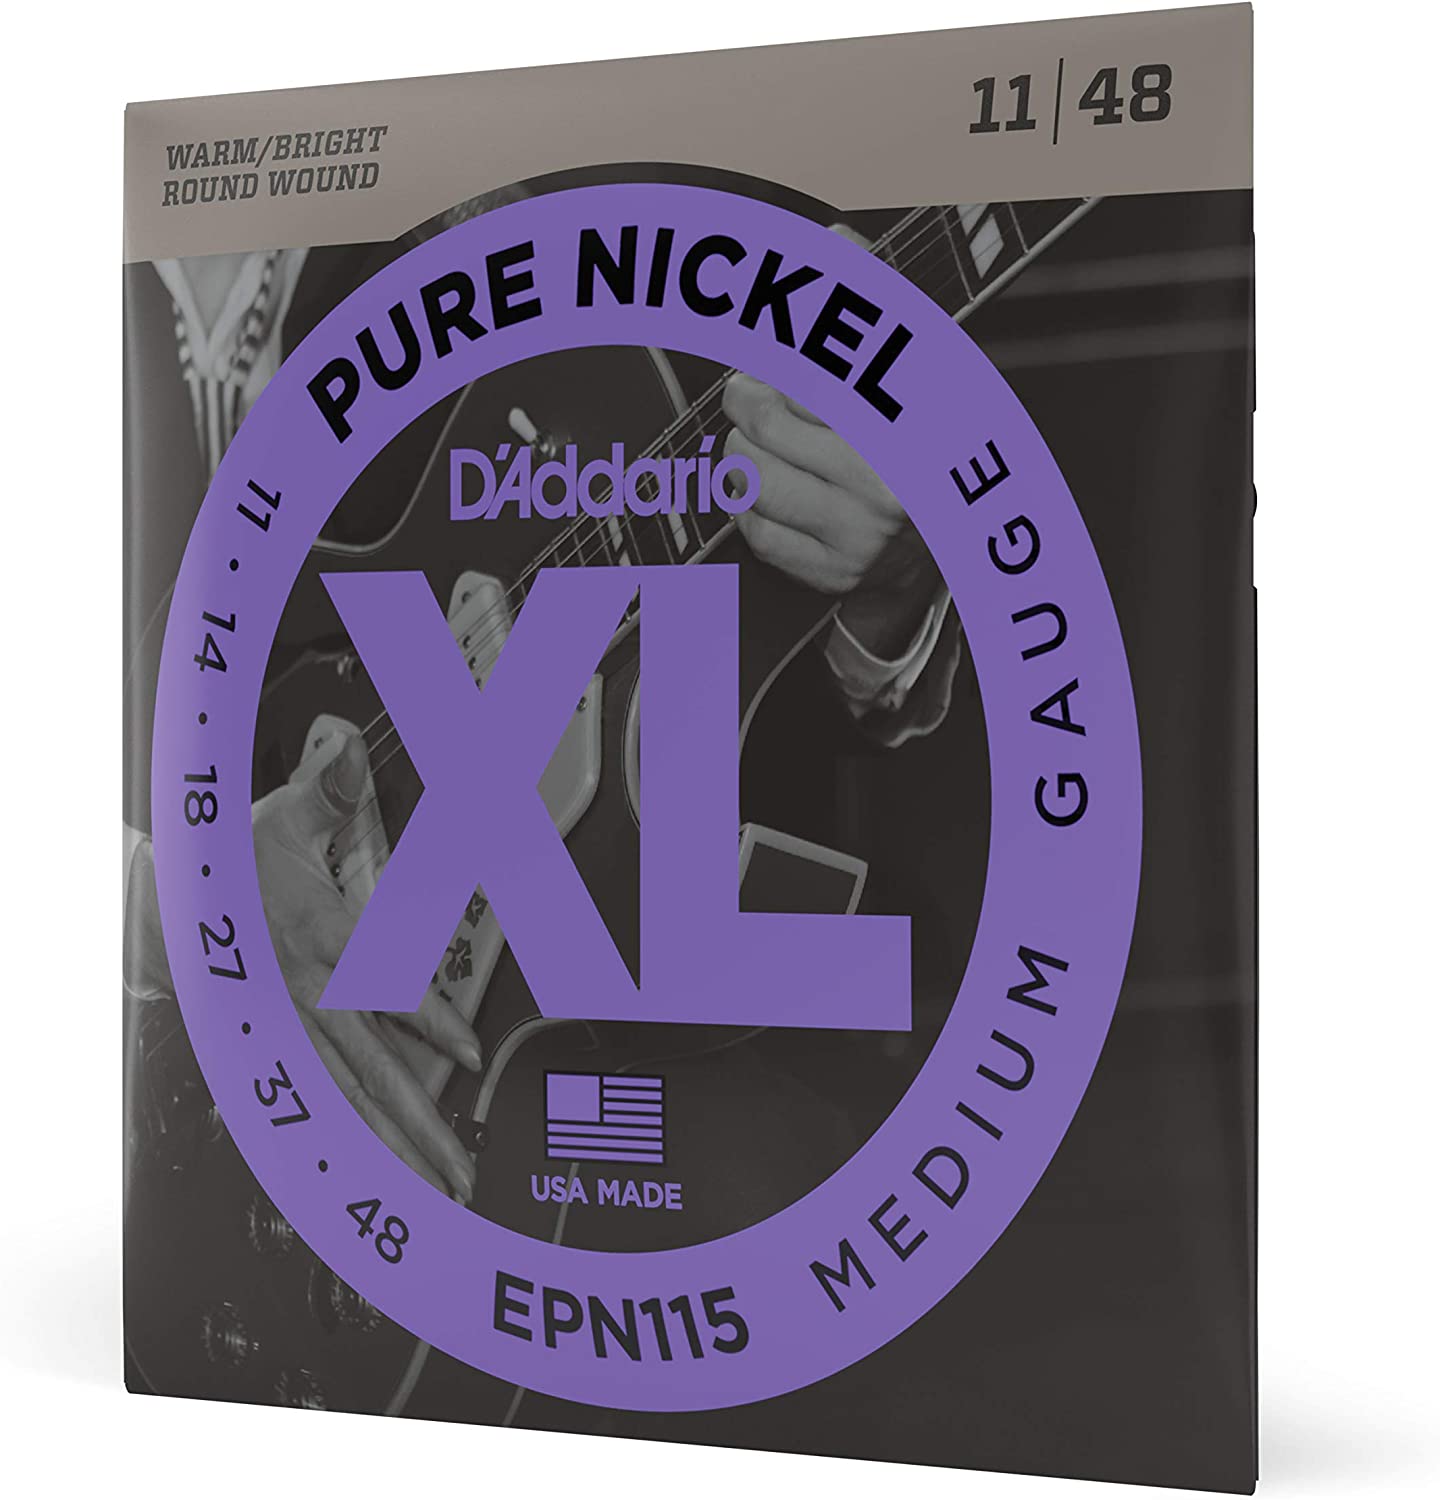 D'Addario XL Pure Nickel Electric Guitar Strings on a white background